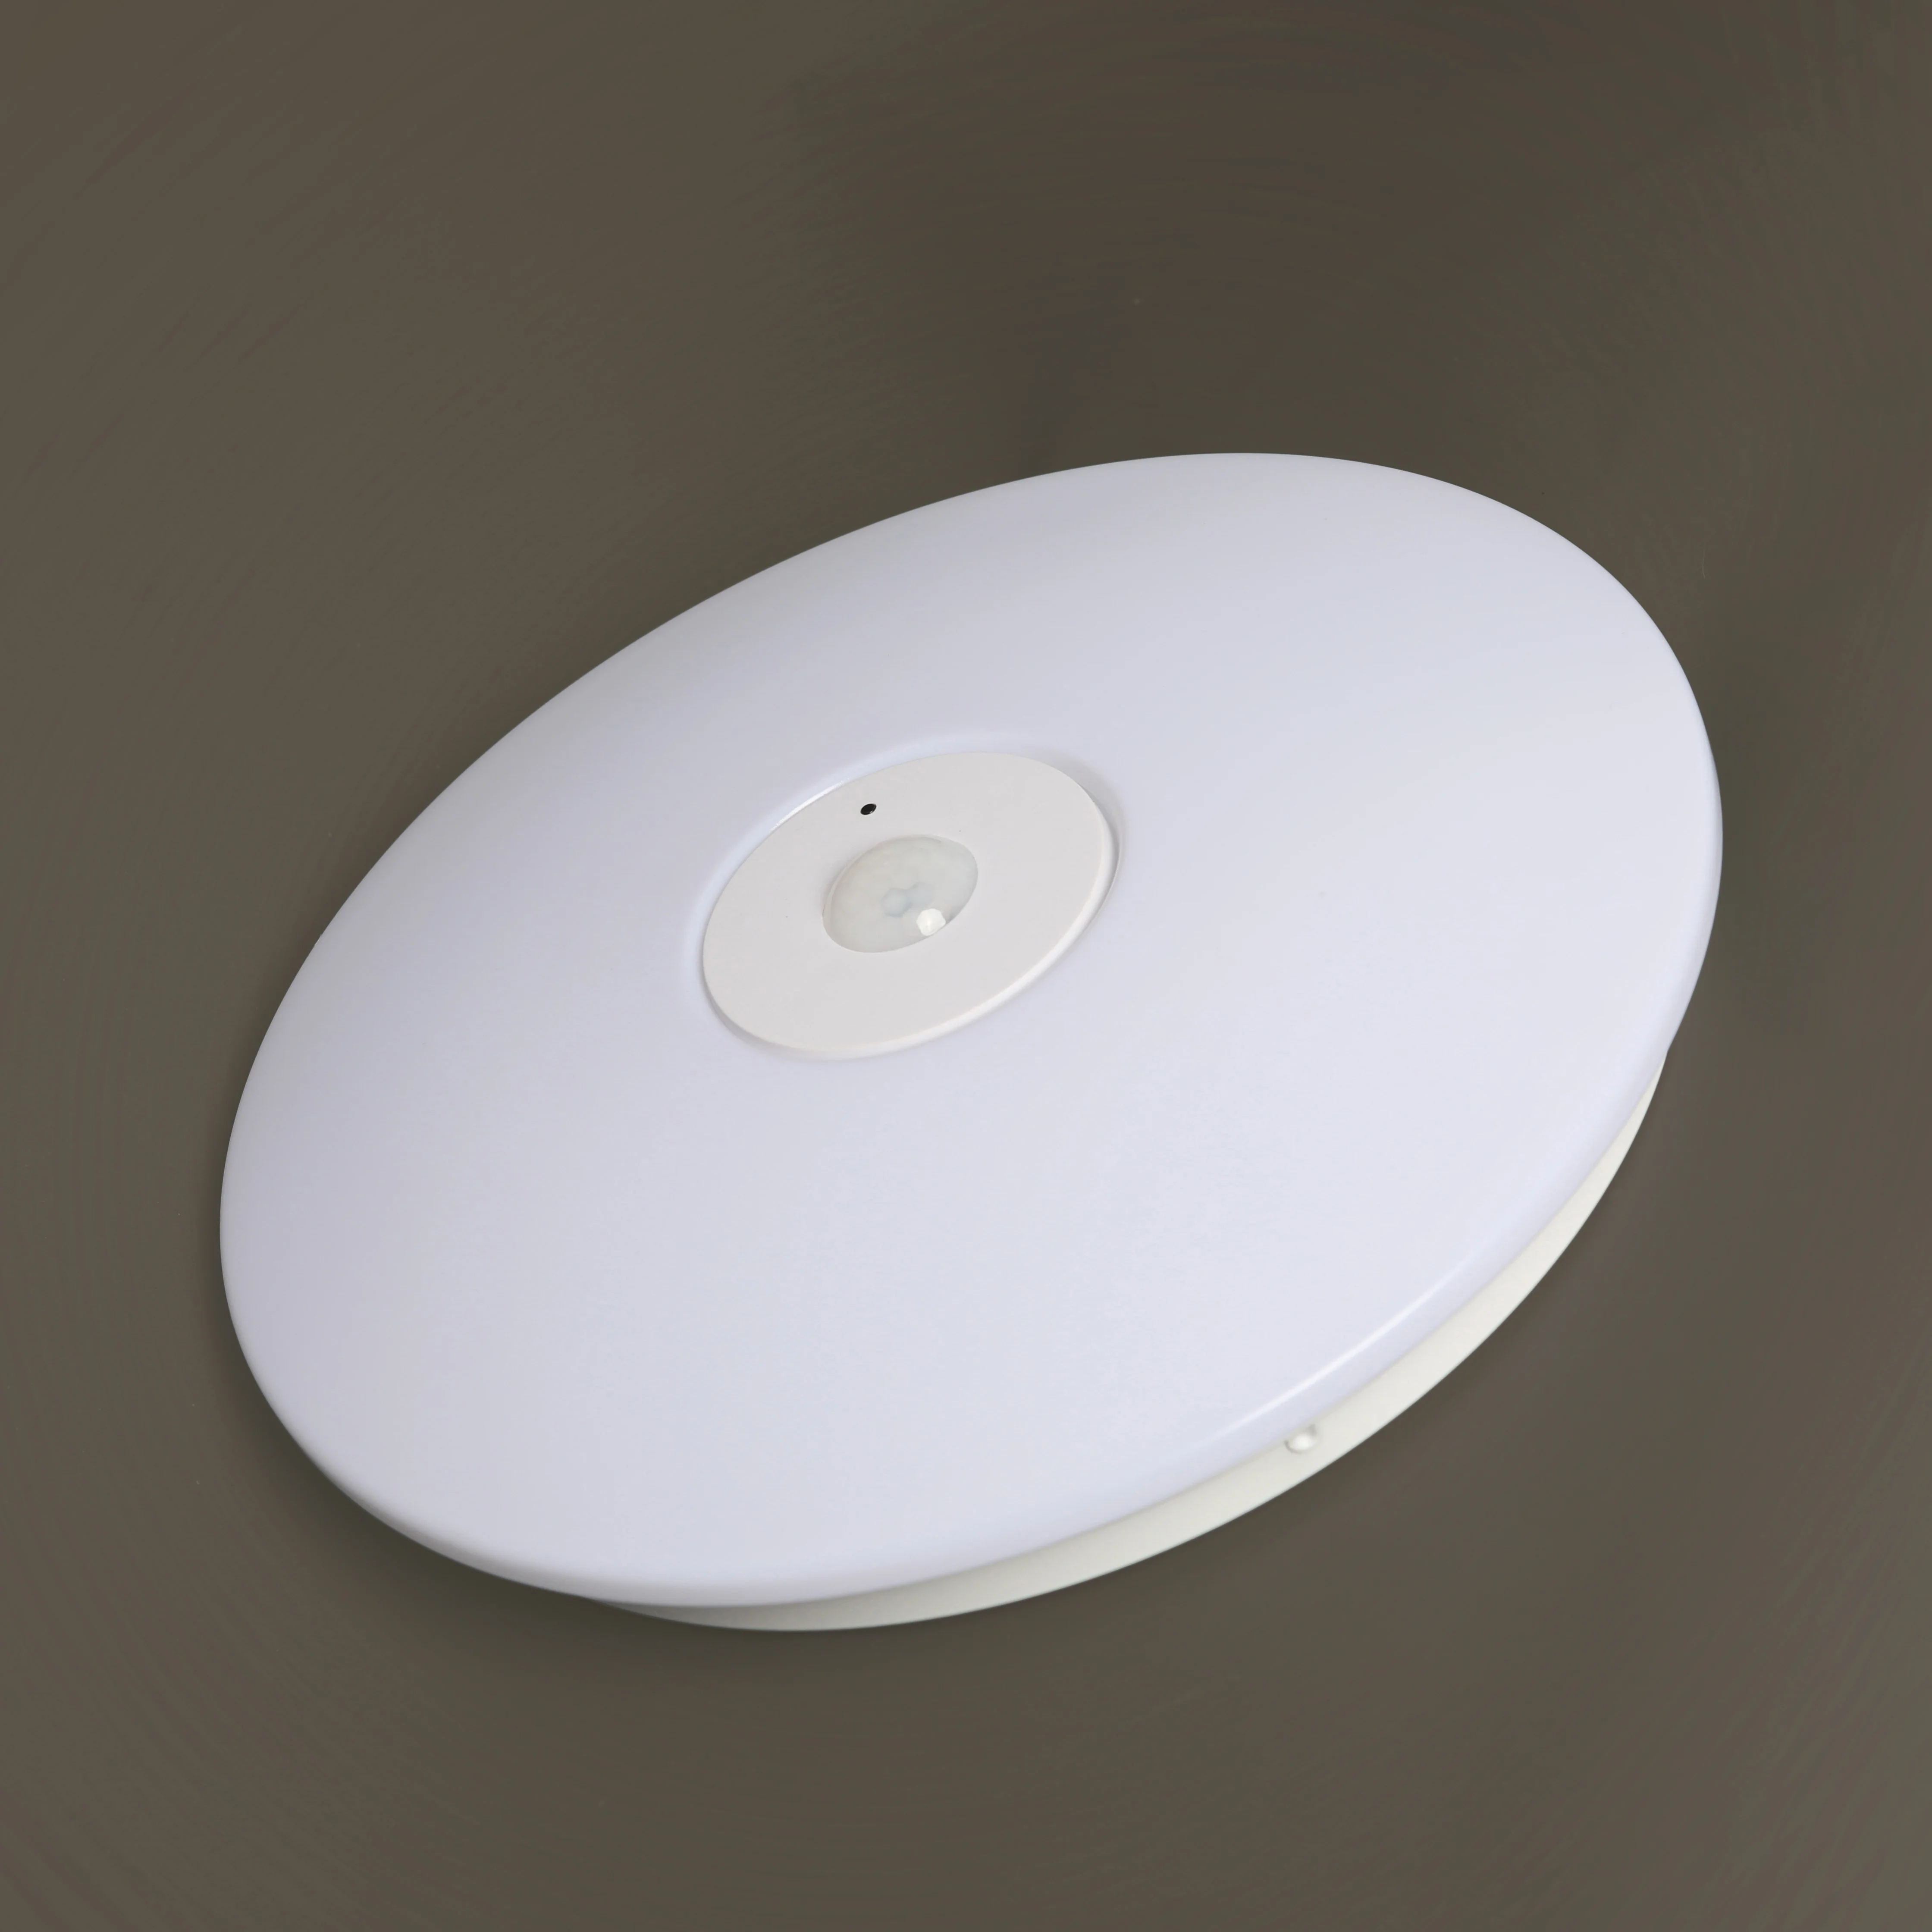 Led ceiling light with motion sensor mount remote battery operated emergency hall led ceiling lights